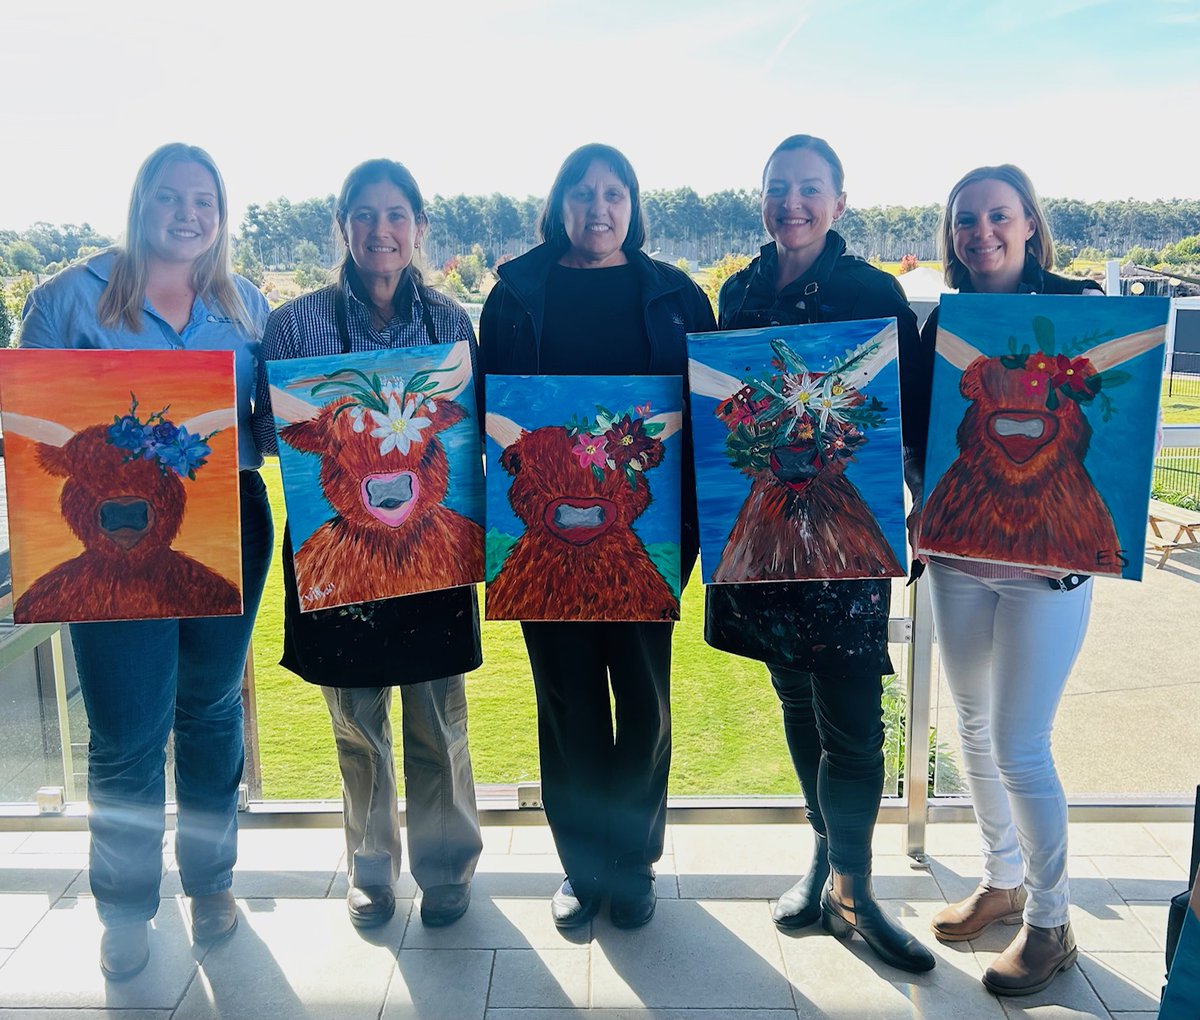 Today, IREC enjoyed an amazing Chat and Create event in Whitton! @SafeWork_NSW, @NSW_RWN and @ramhpnsw hosted this fantastic opportunity to network with others about the importance of agricultural safety. We also had fun painting a cow during the conversations! Thank you!